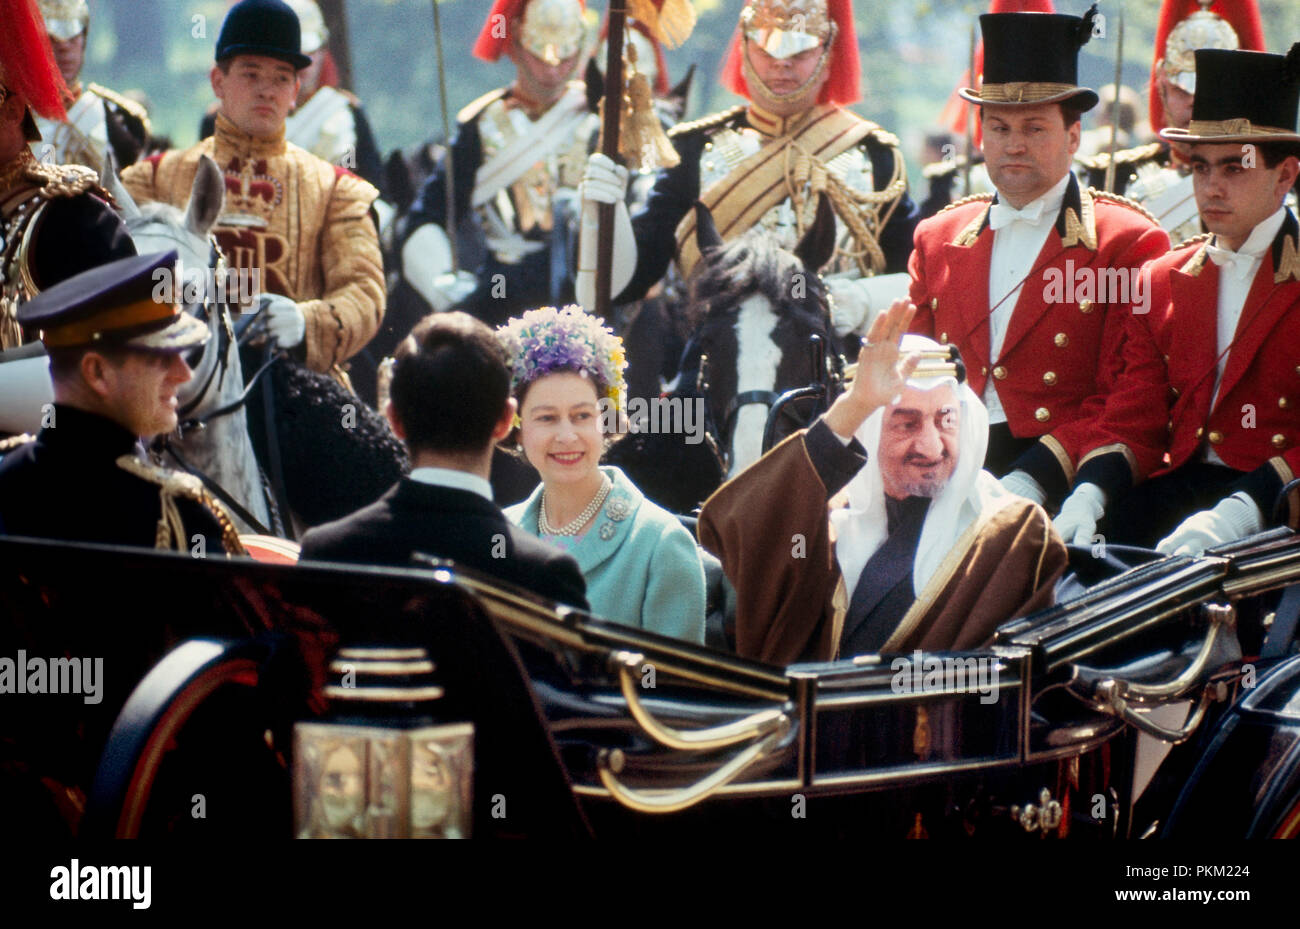 A State Visit in May; 1967; Her Majesty Queen Elizabeth ll, accompanied by her husband, the Duke of Edinbugh (Prince Phillip), rides in an open carriage with King Faisal of Saudi Arabia on the Mall towards Buckingham Palace. They are escorted by guards in ceremonial dress. Stock Photo